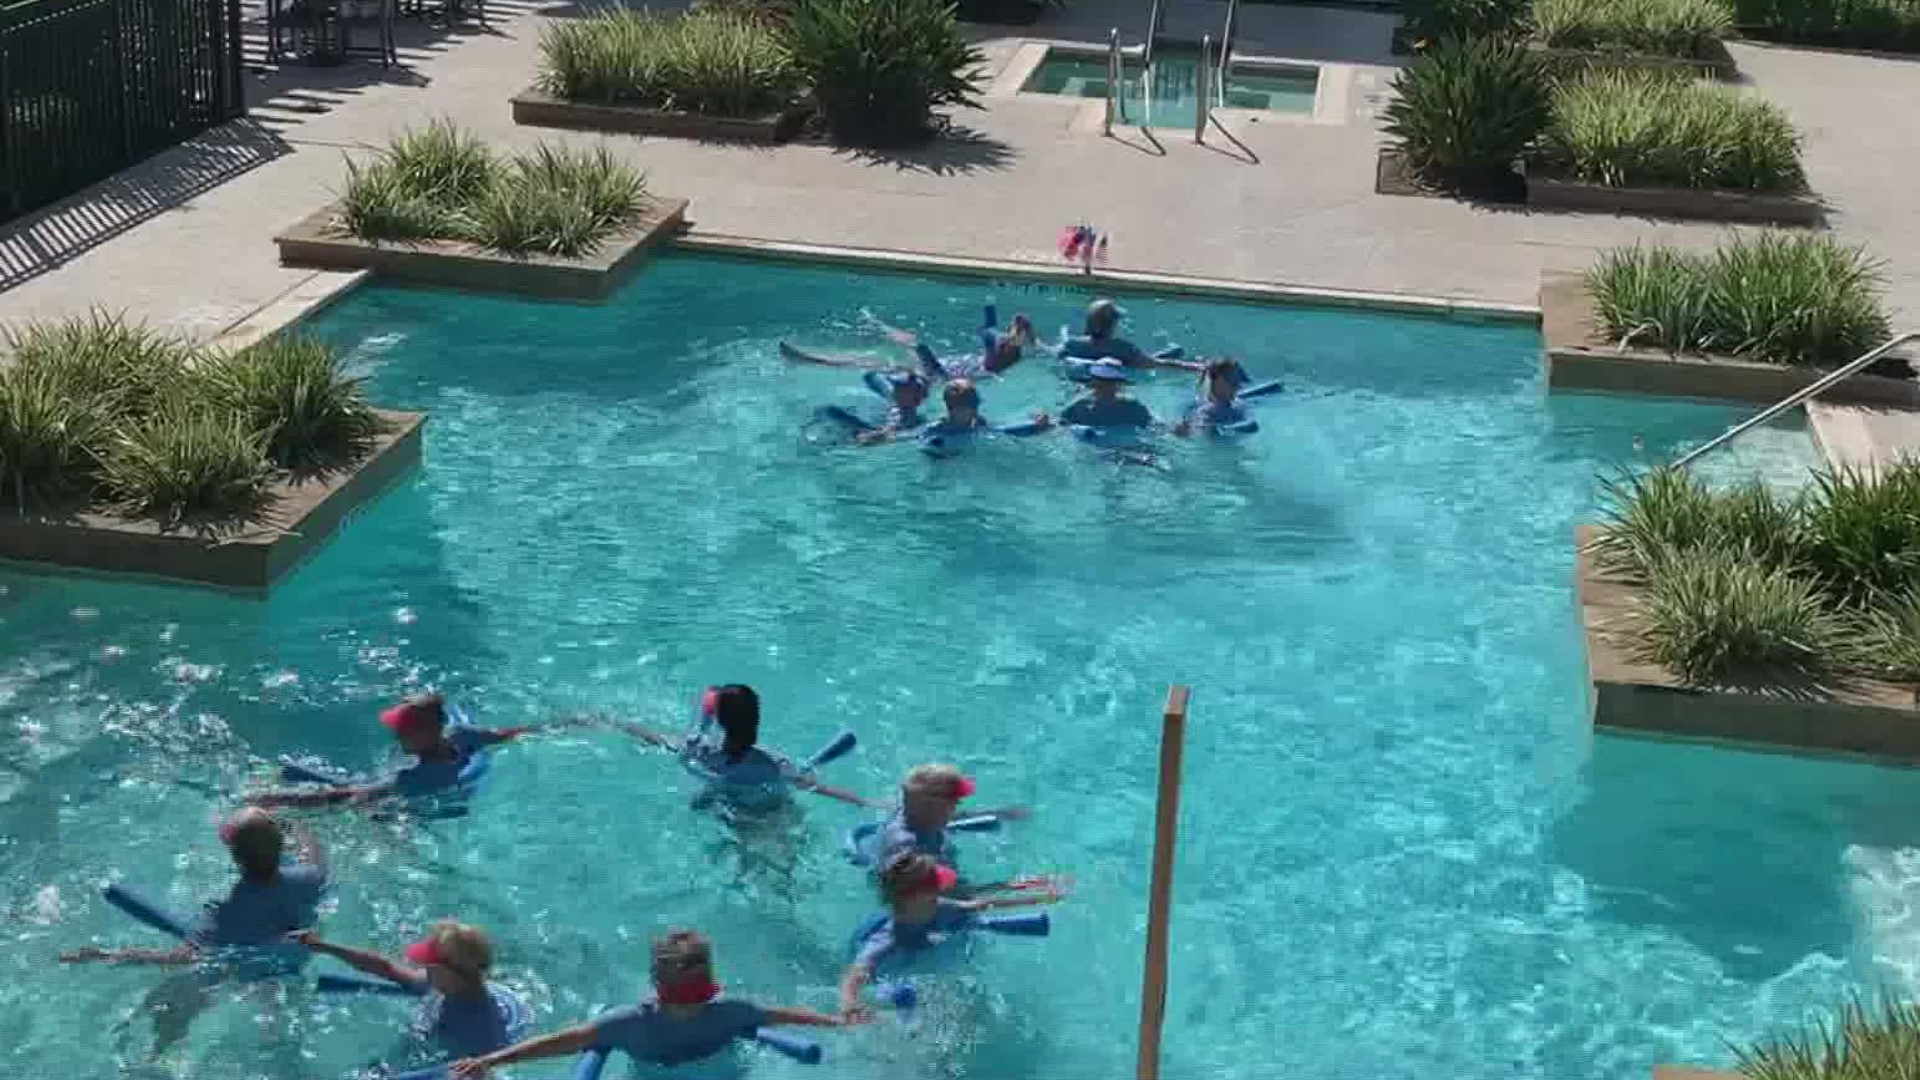 Sync or Swim is a water aerobics group created by the residents of the Mirador Senior Living Community.